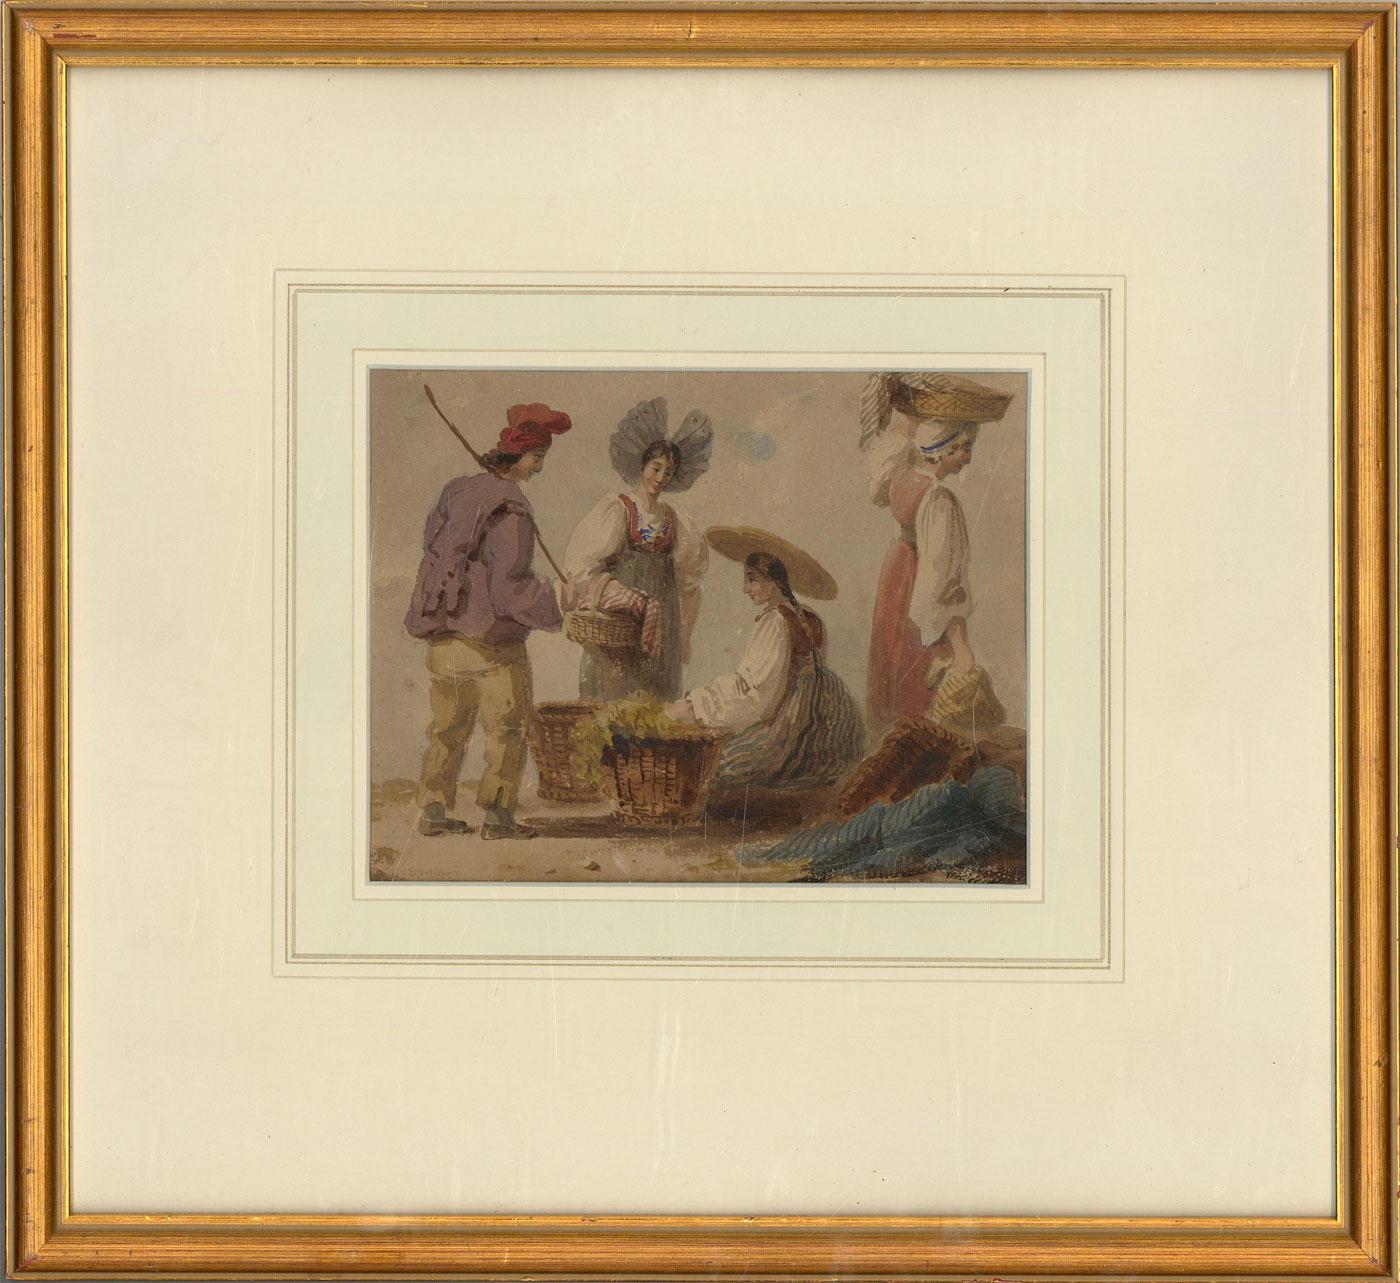 A delightful watercolour painting with gouache details, depicting traditional street vendors with their baskets. Well-presented in a washline card mount and in a distressed gilt effect frame. On watercolour paper.
